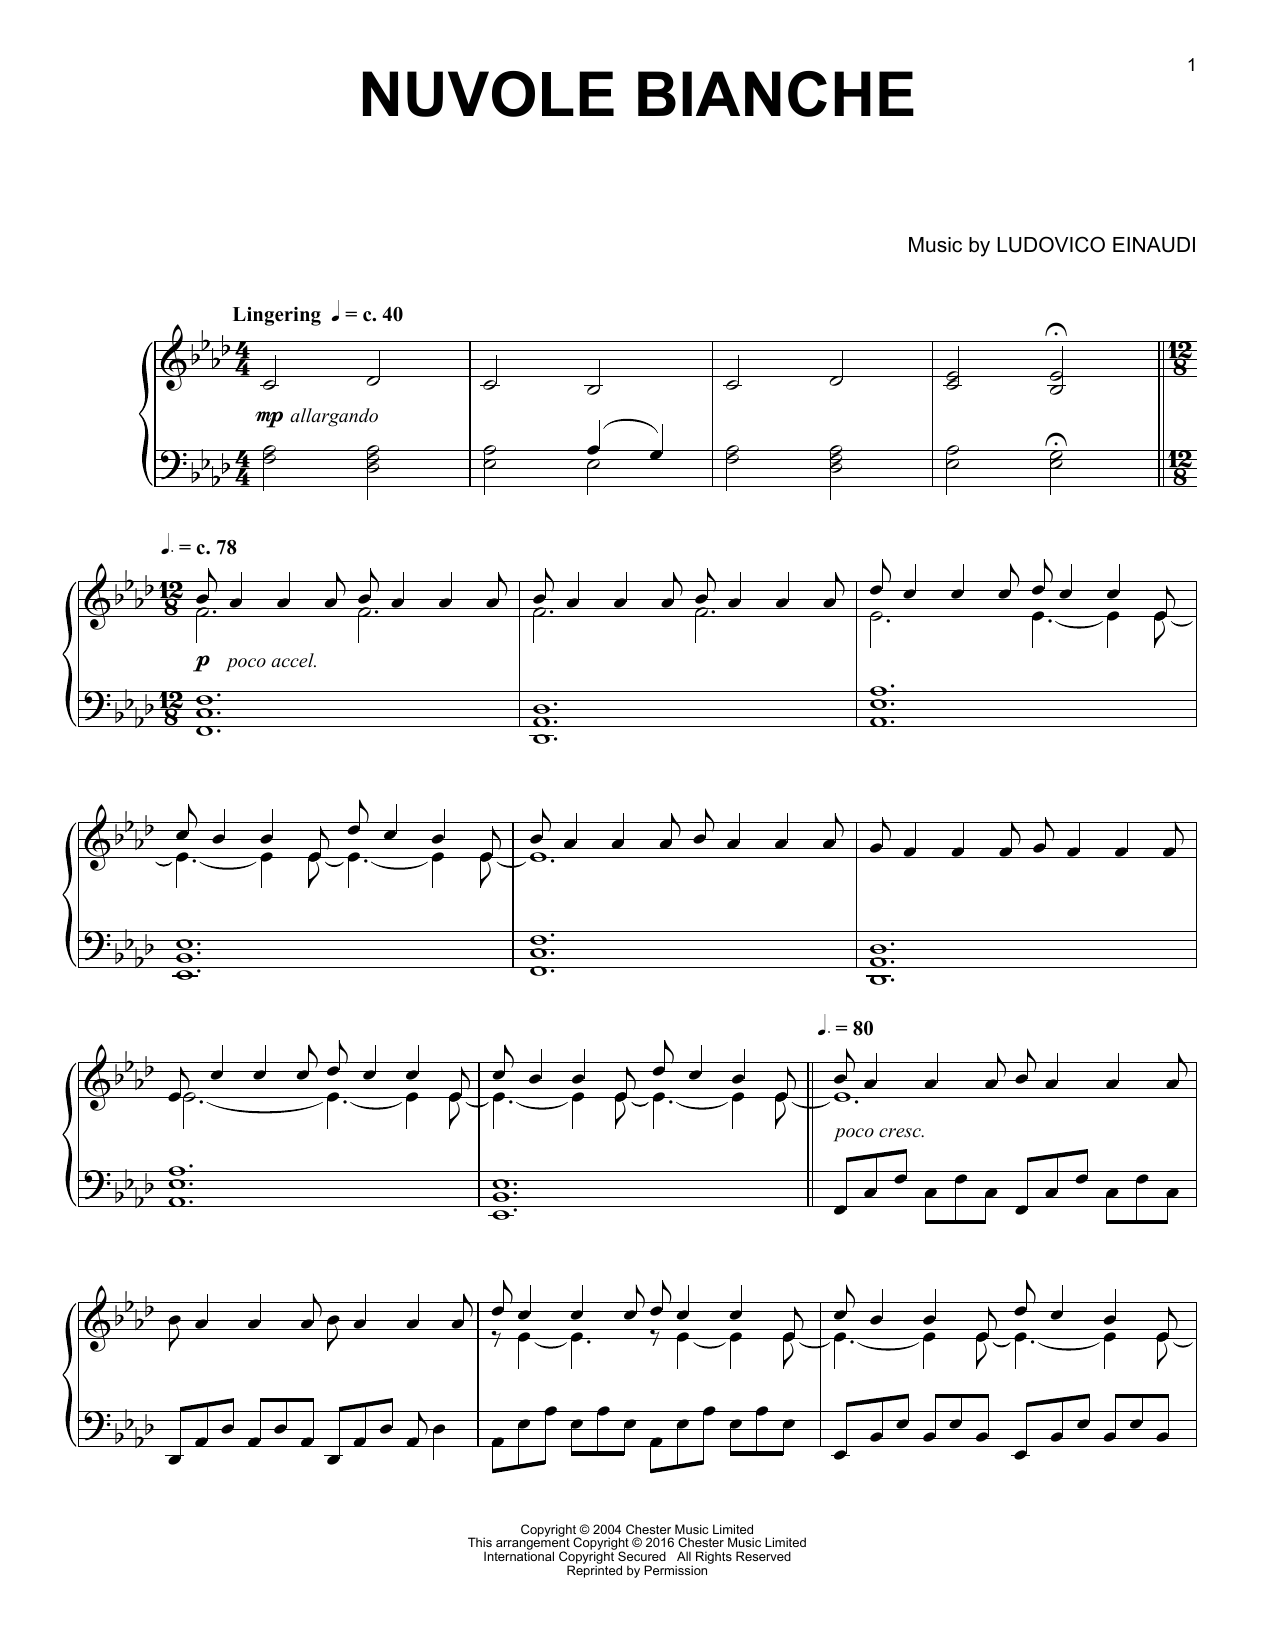 Nuvole Bianche Sheet Music Pdf Rollbaldcircle He trained at the conservatorio verdi. rollbaldcircle